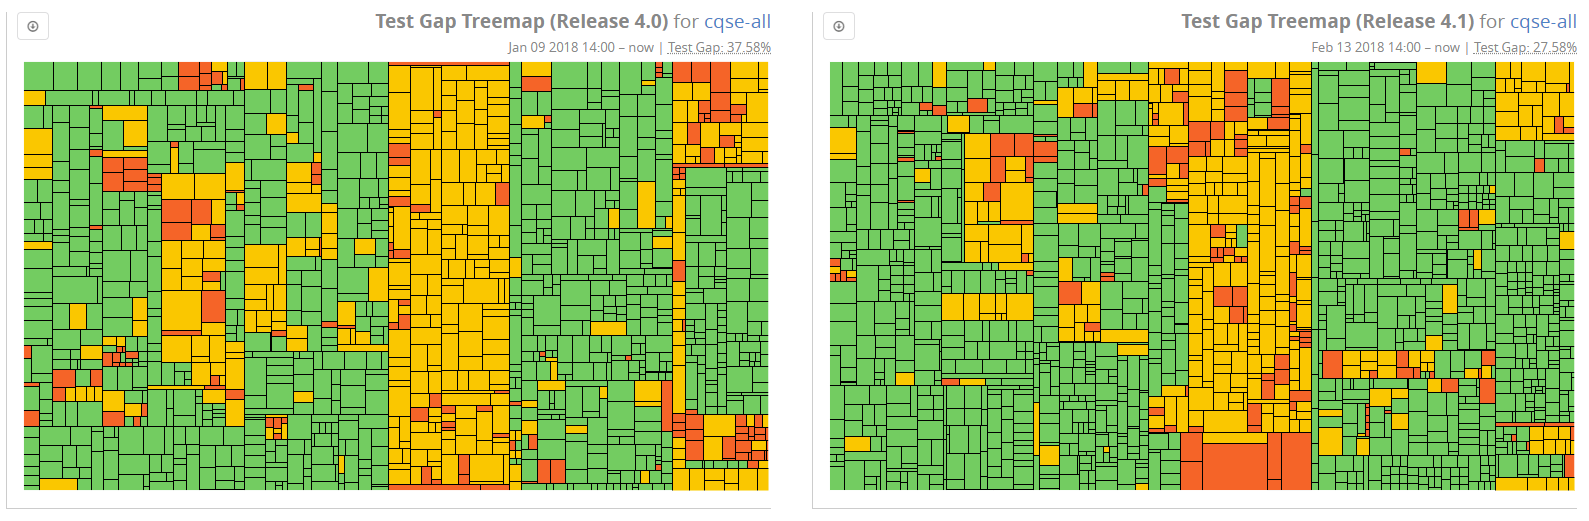 Comparing test gaps between releases 4.0 and 4.1